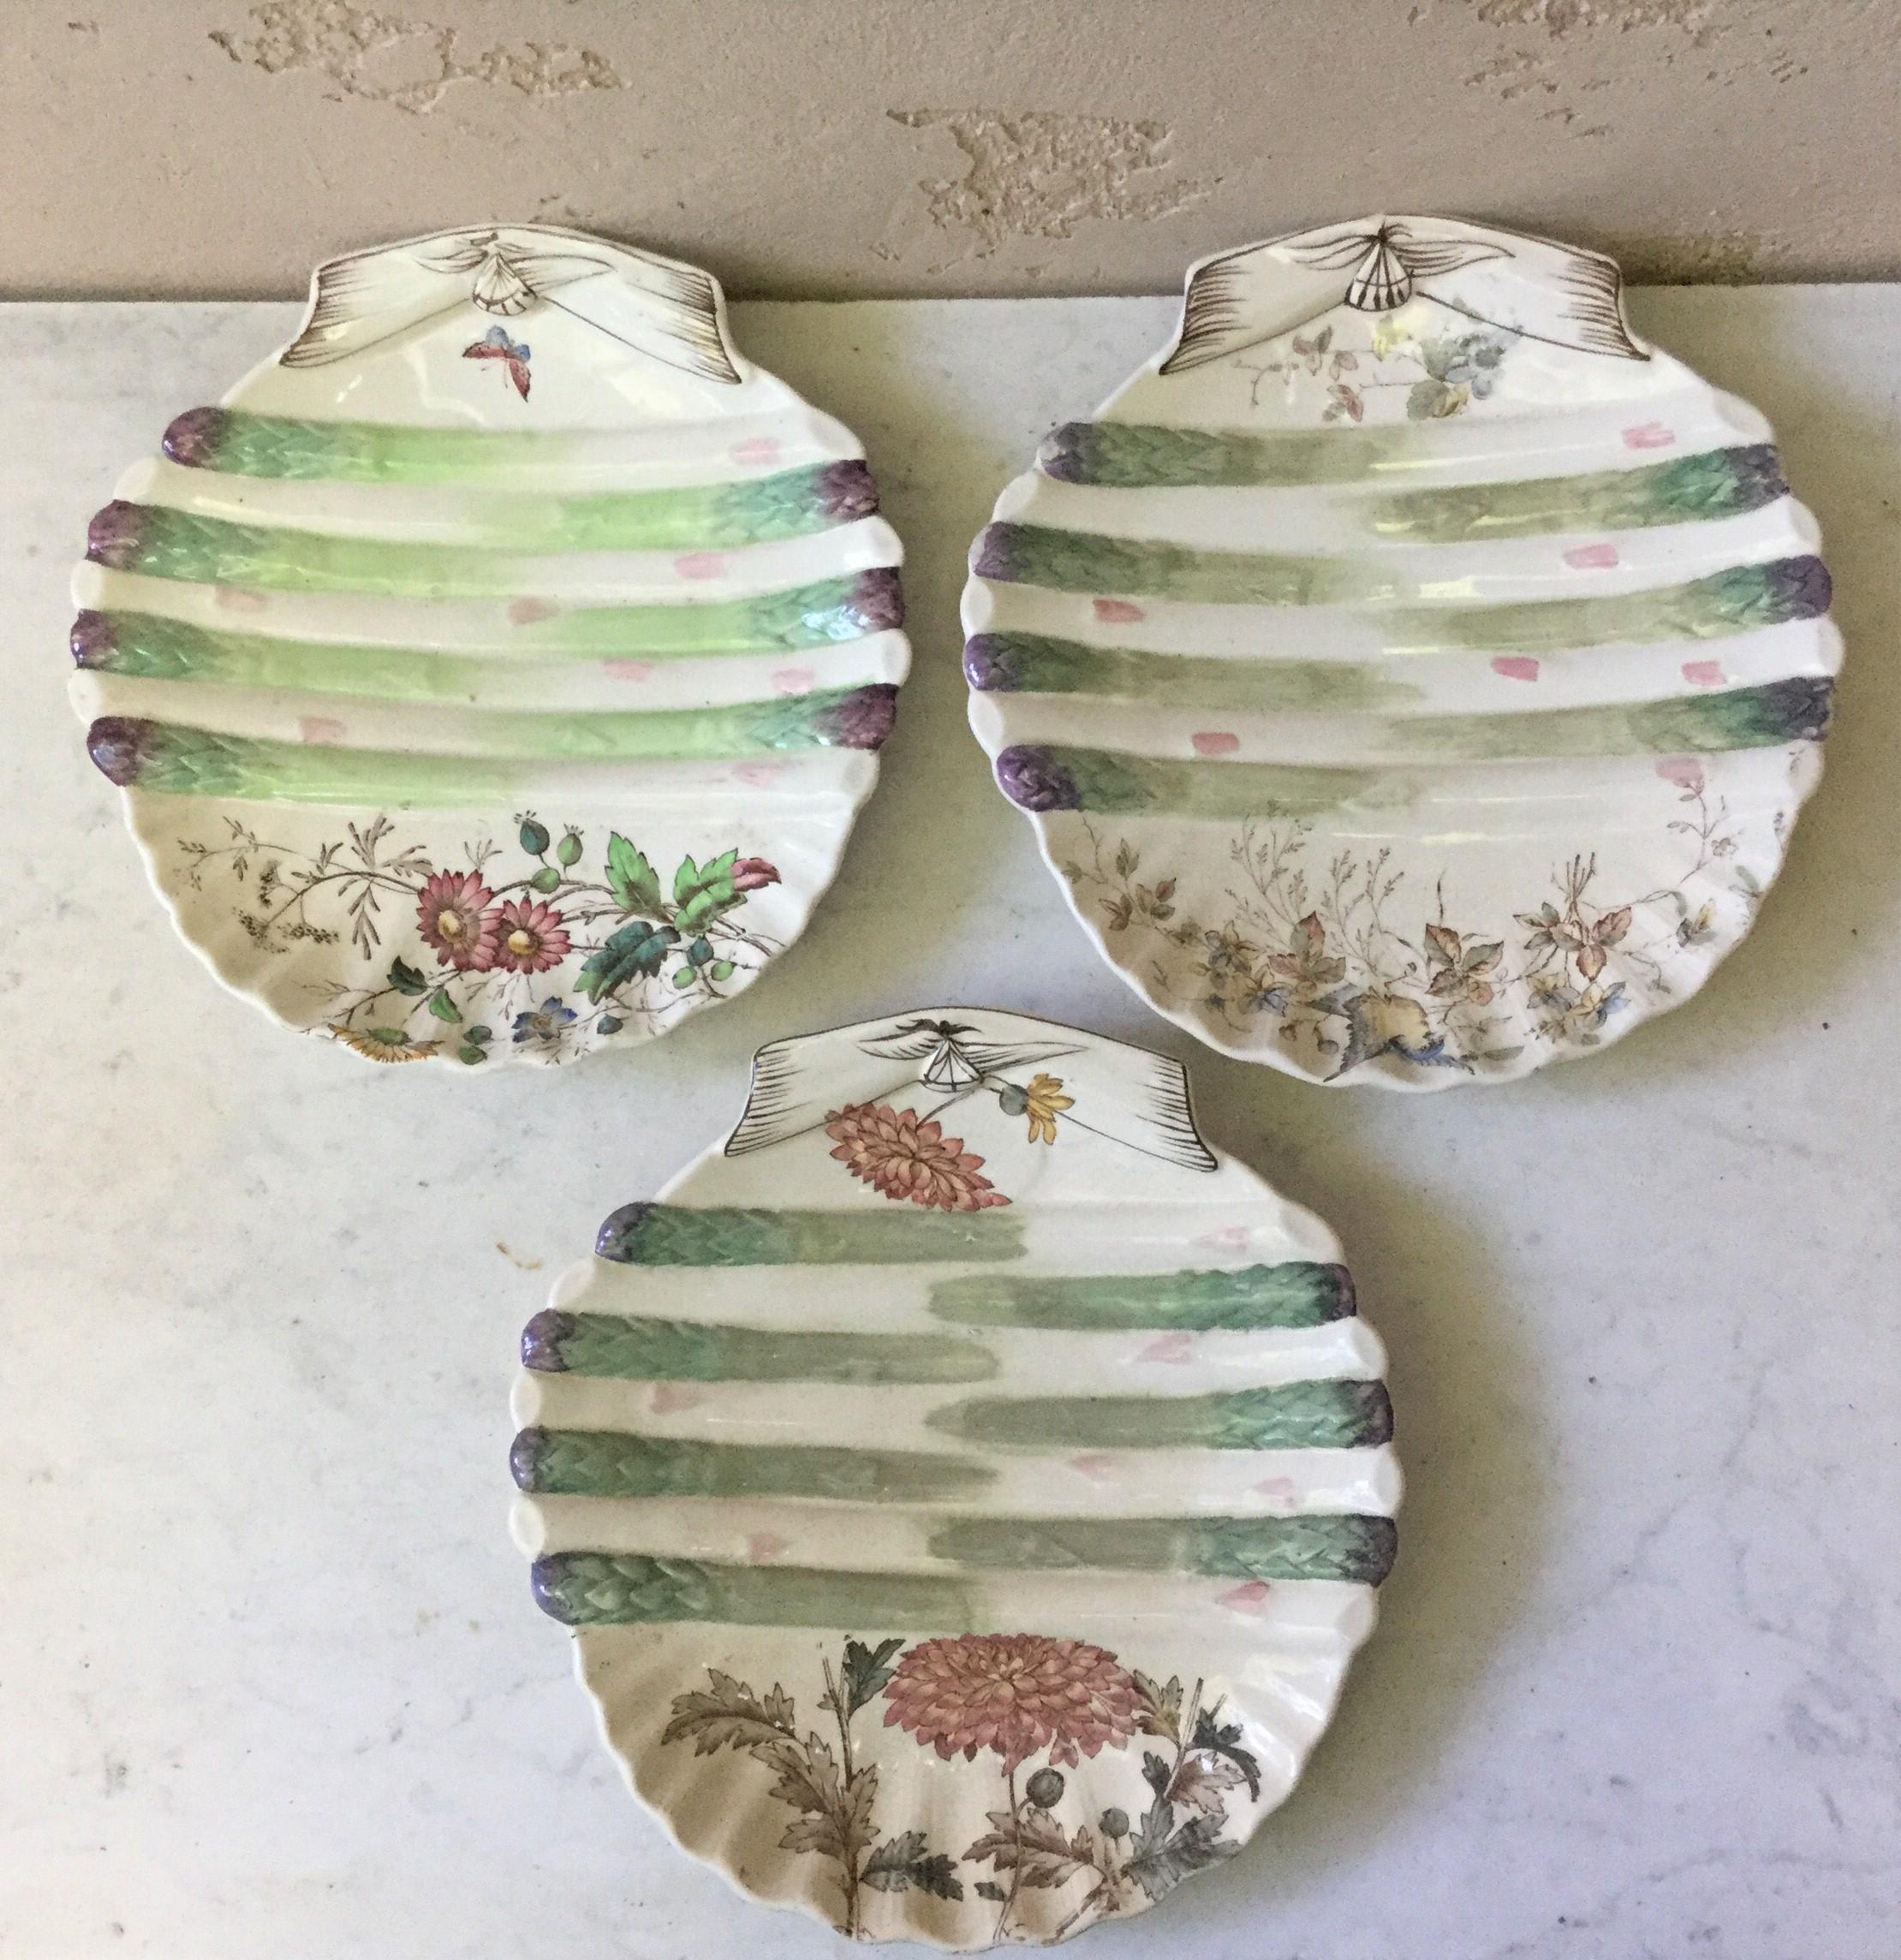 Late 19th Century English 19th Century Asparagus Wall Plate with Mums